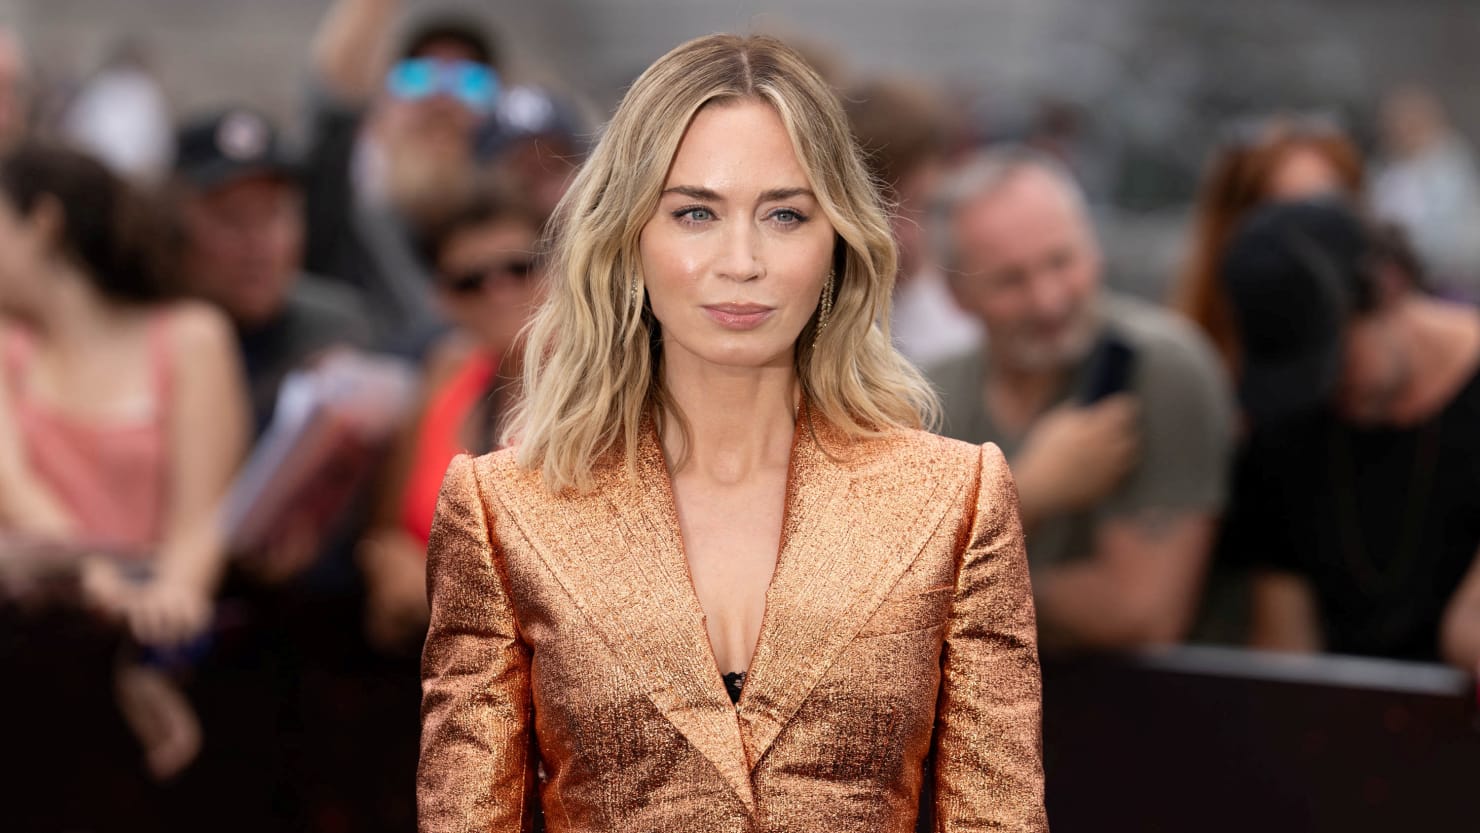  Emily Blunt Says She's Taking a Break From Hollywood